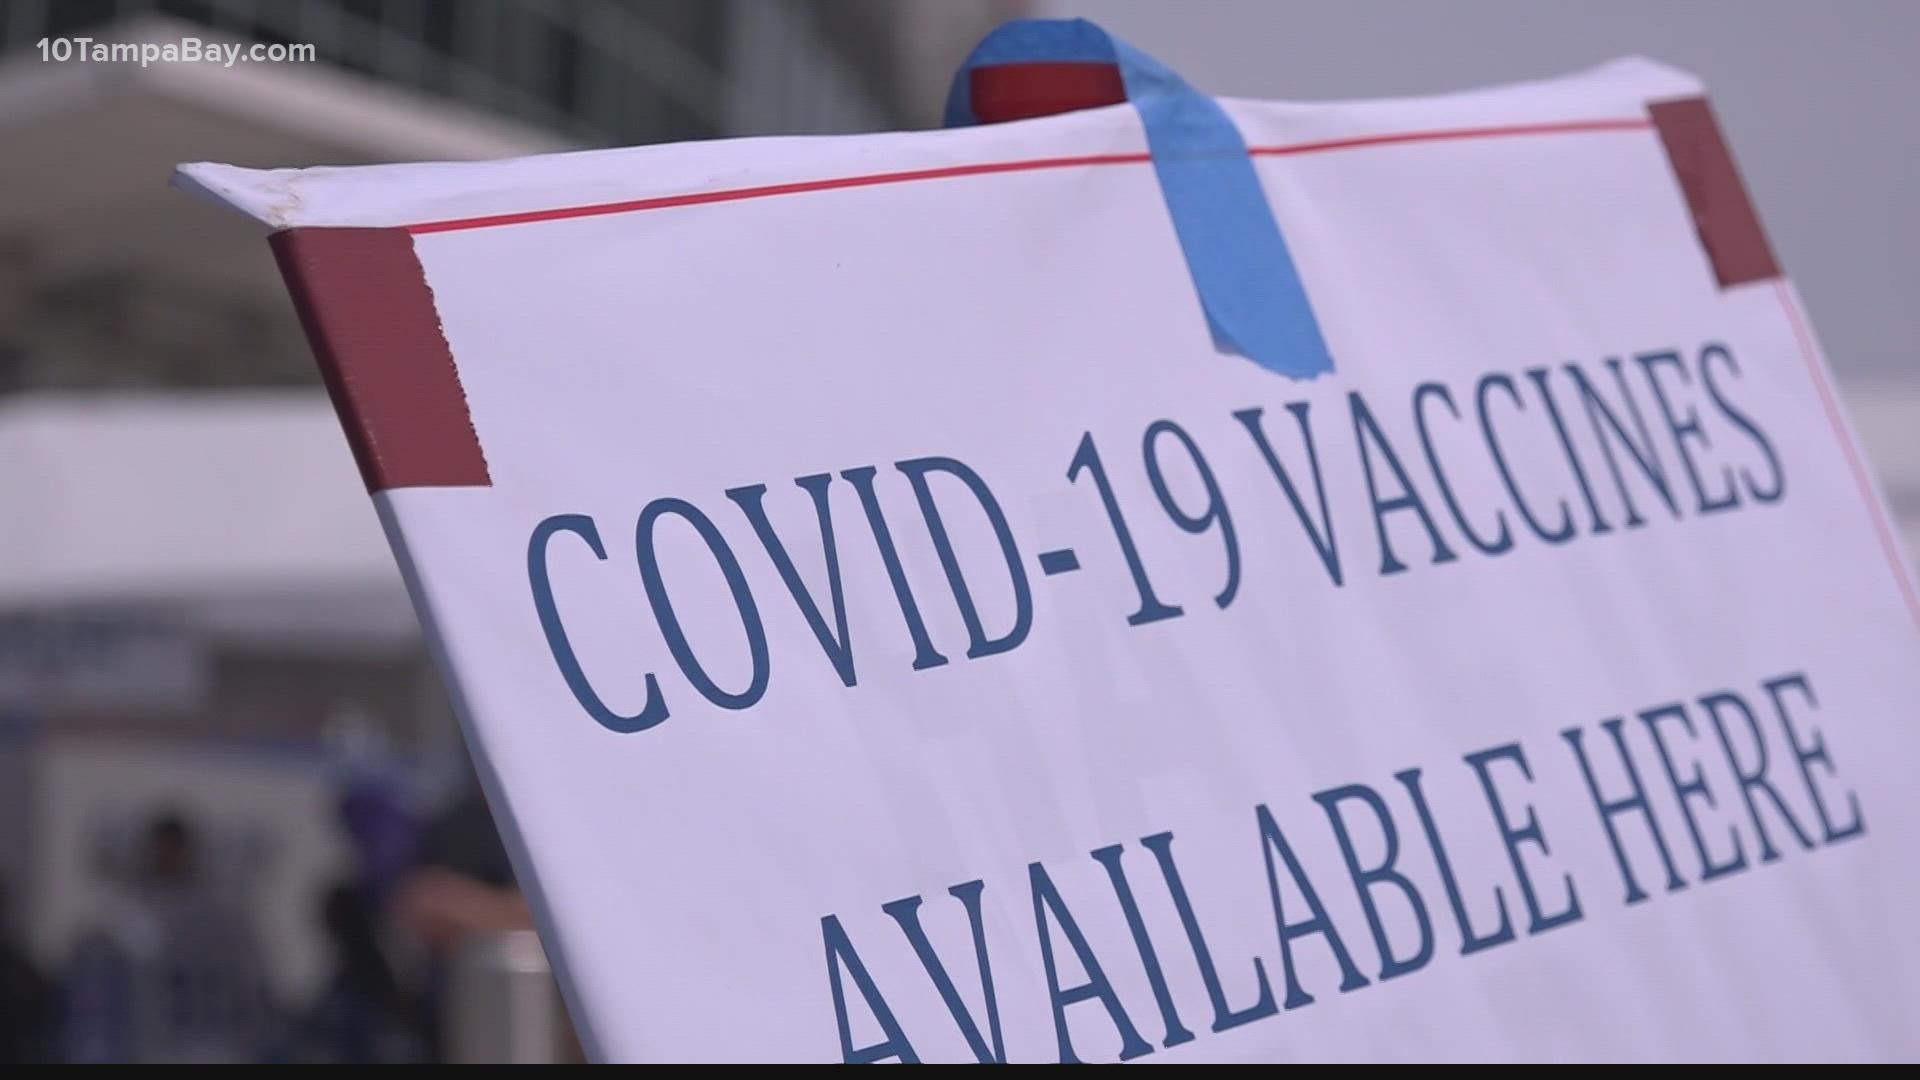 As the state sees record-setting new case totals and hospitalizations, local health experts believe people need to act as a community to best fight against COVID-19.